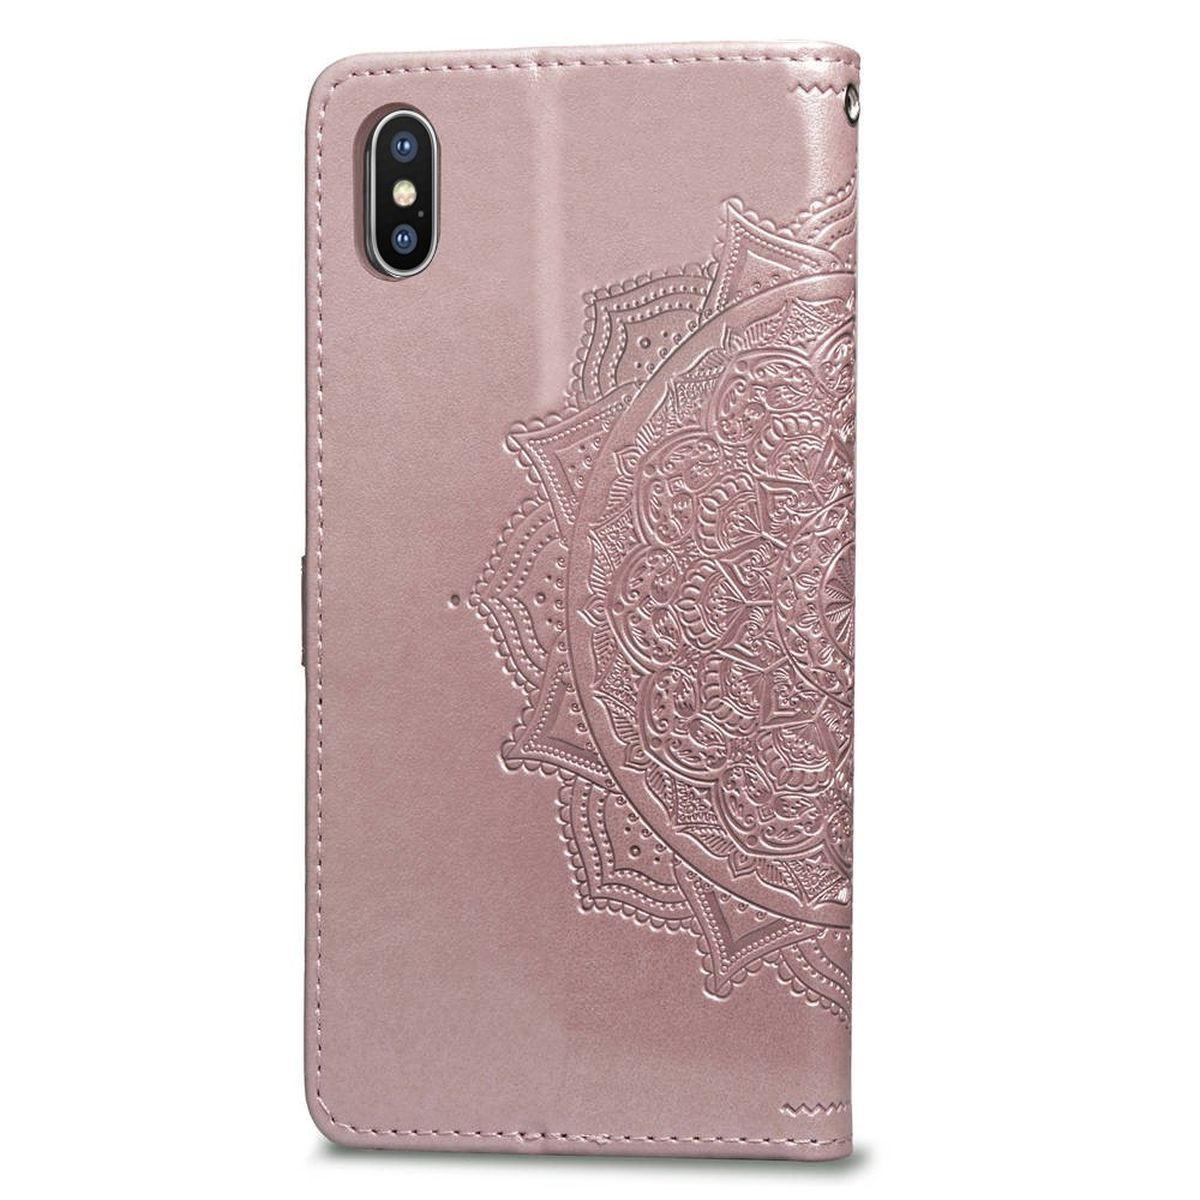 COVERKINGZ Klapphülle mit Mandala Apple, Rosegold Xs Max, Muster, iPhone Bookcover